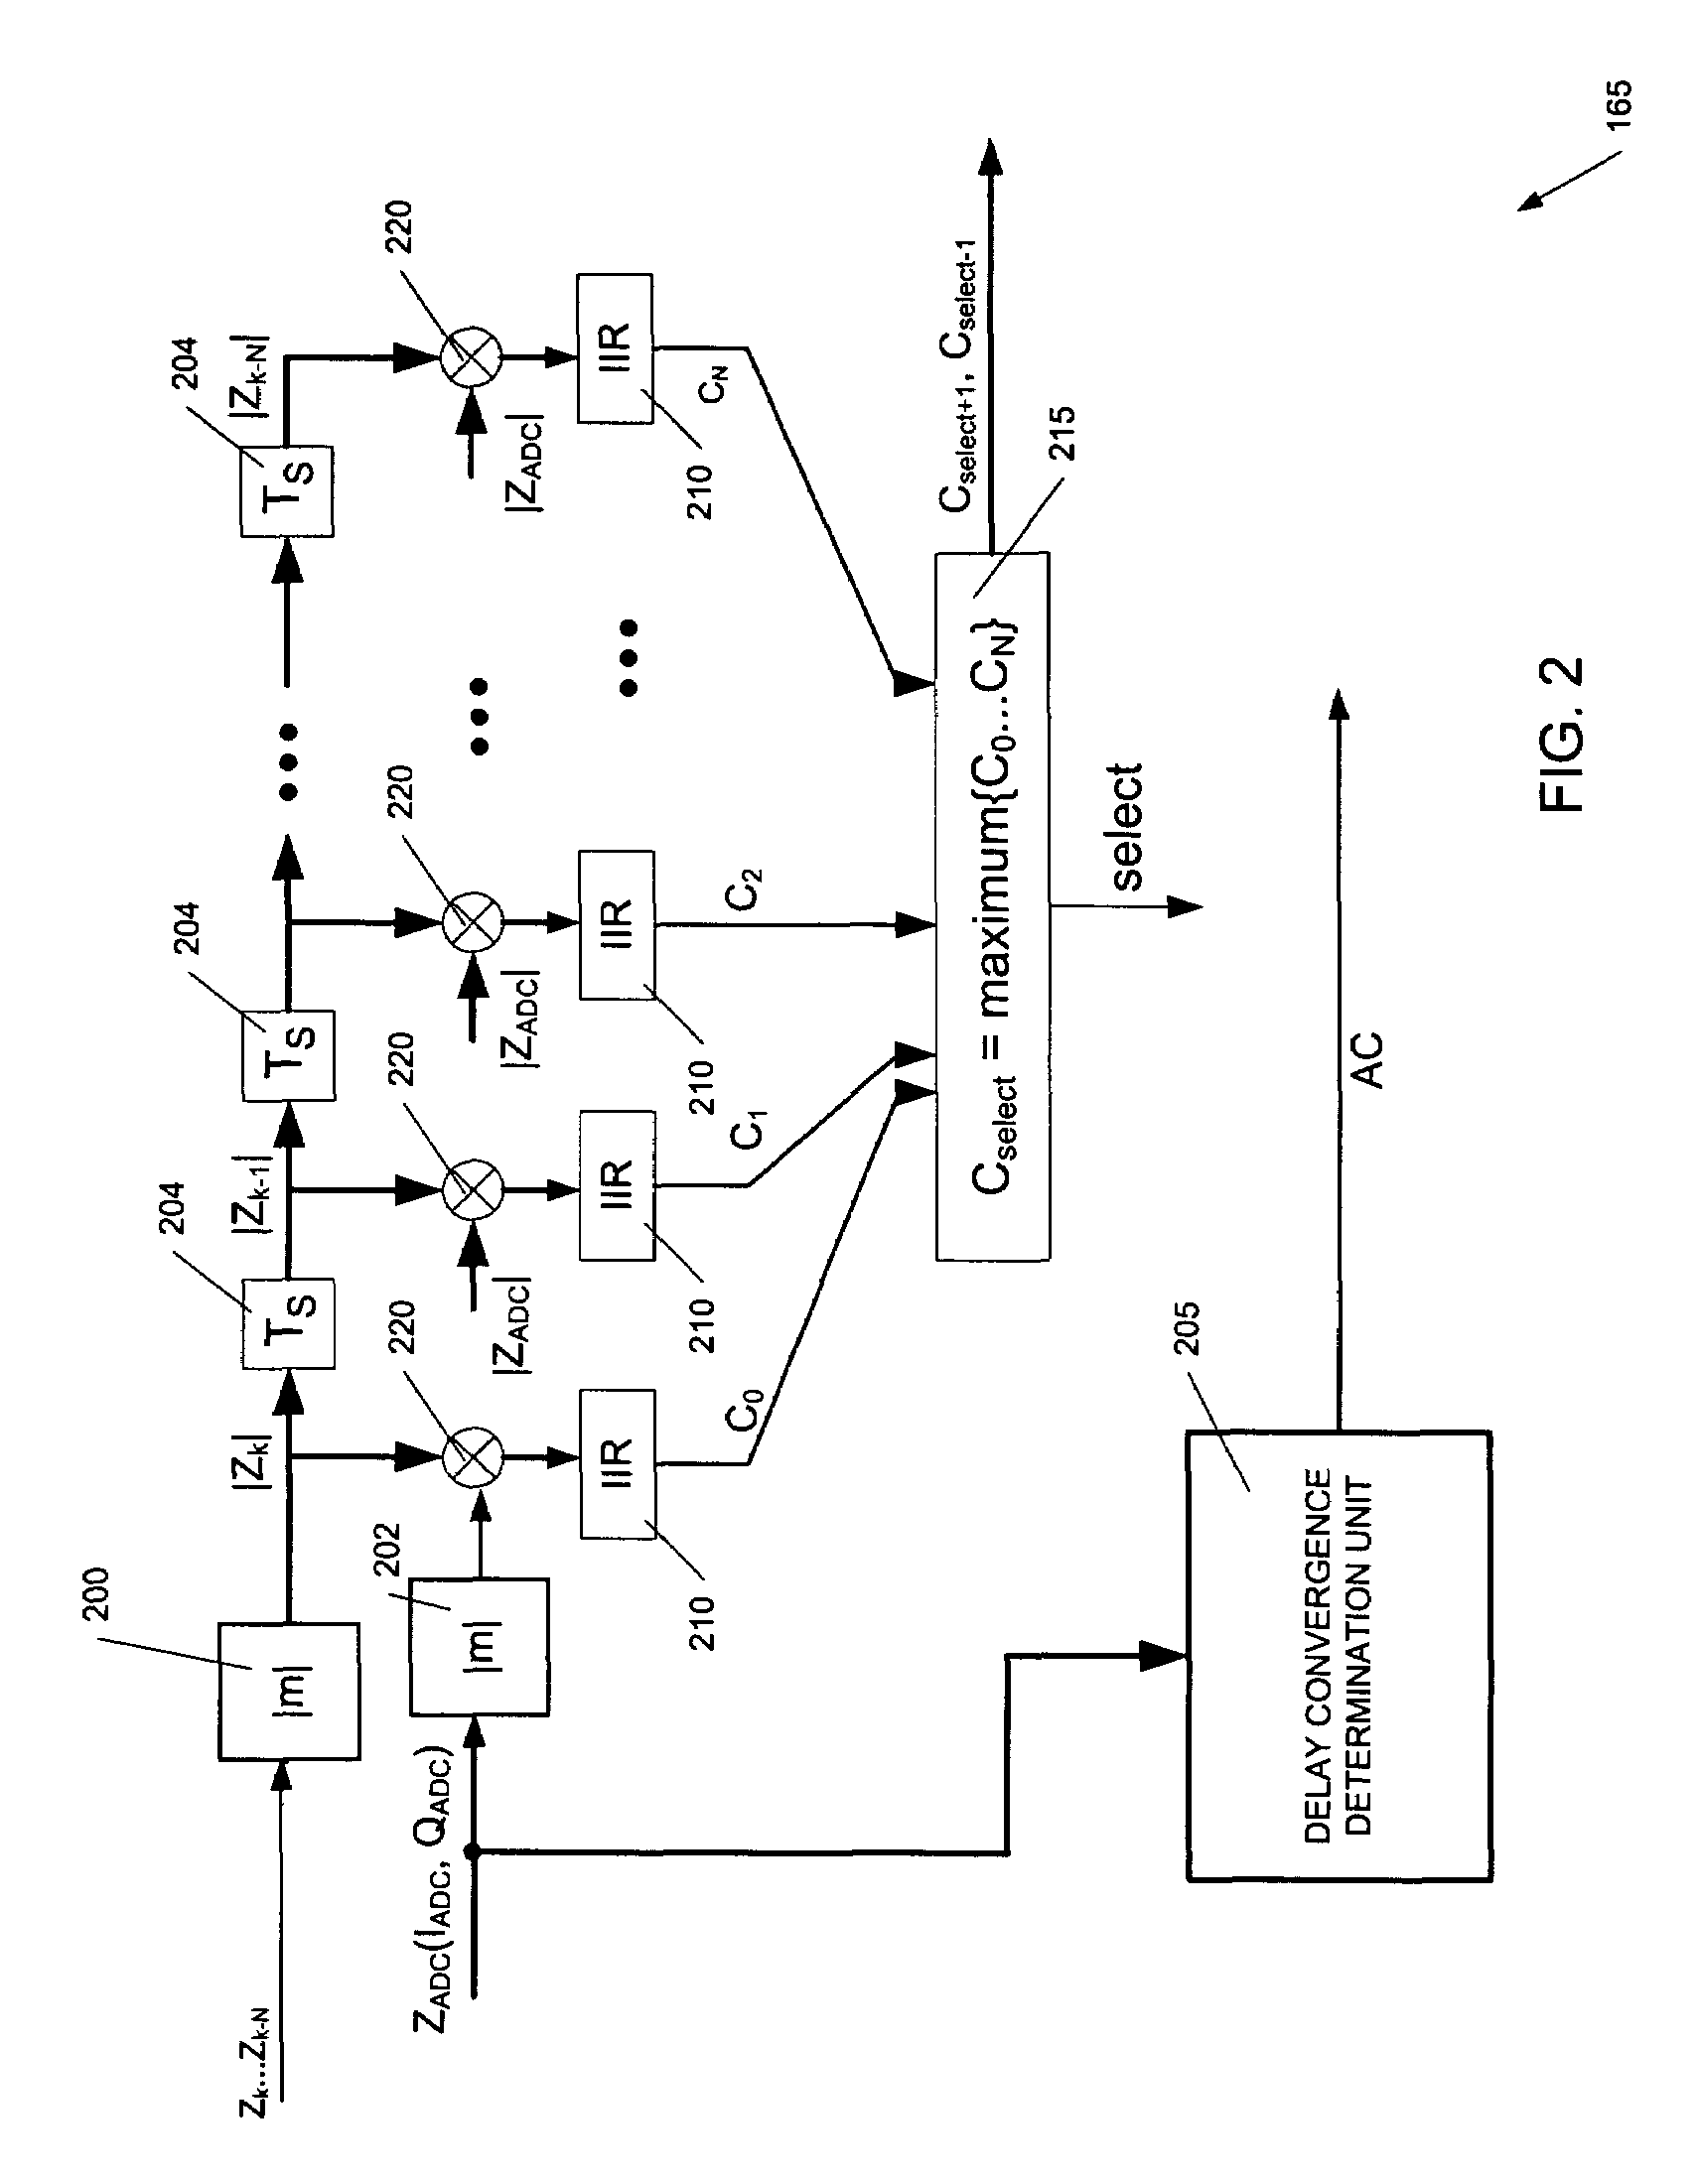 Method and apparatus for amplifier linearization using adaptive predistortion